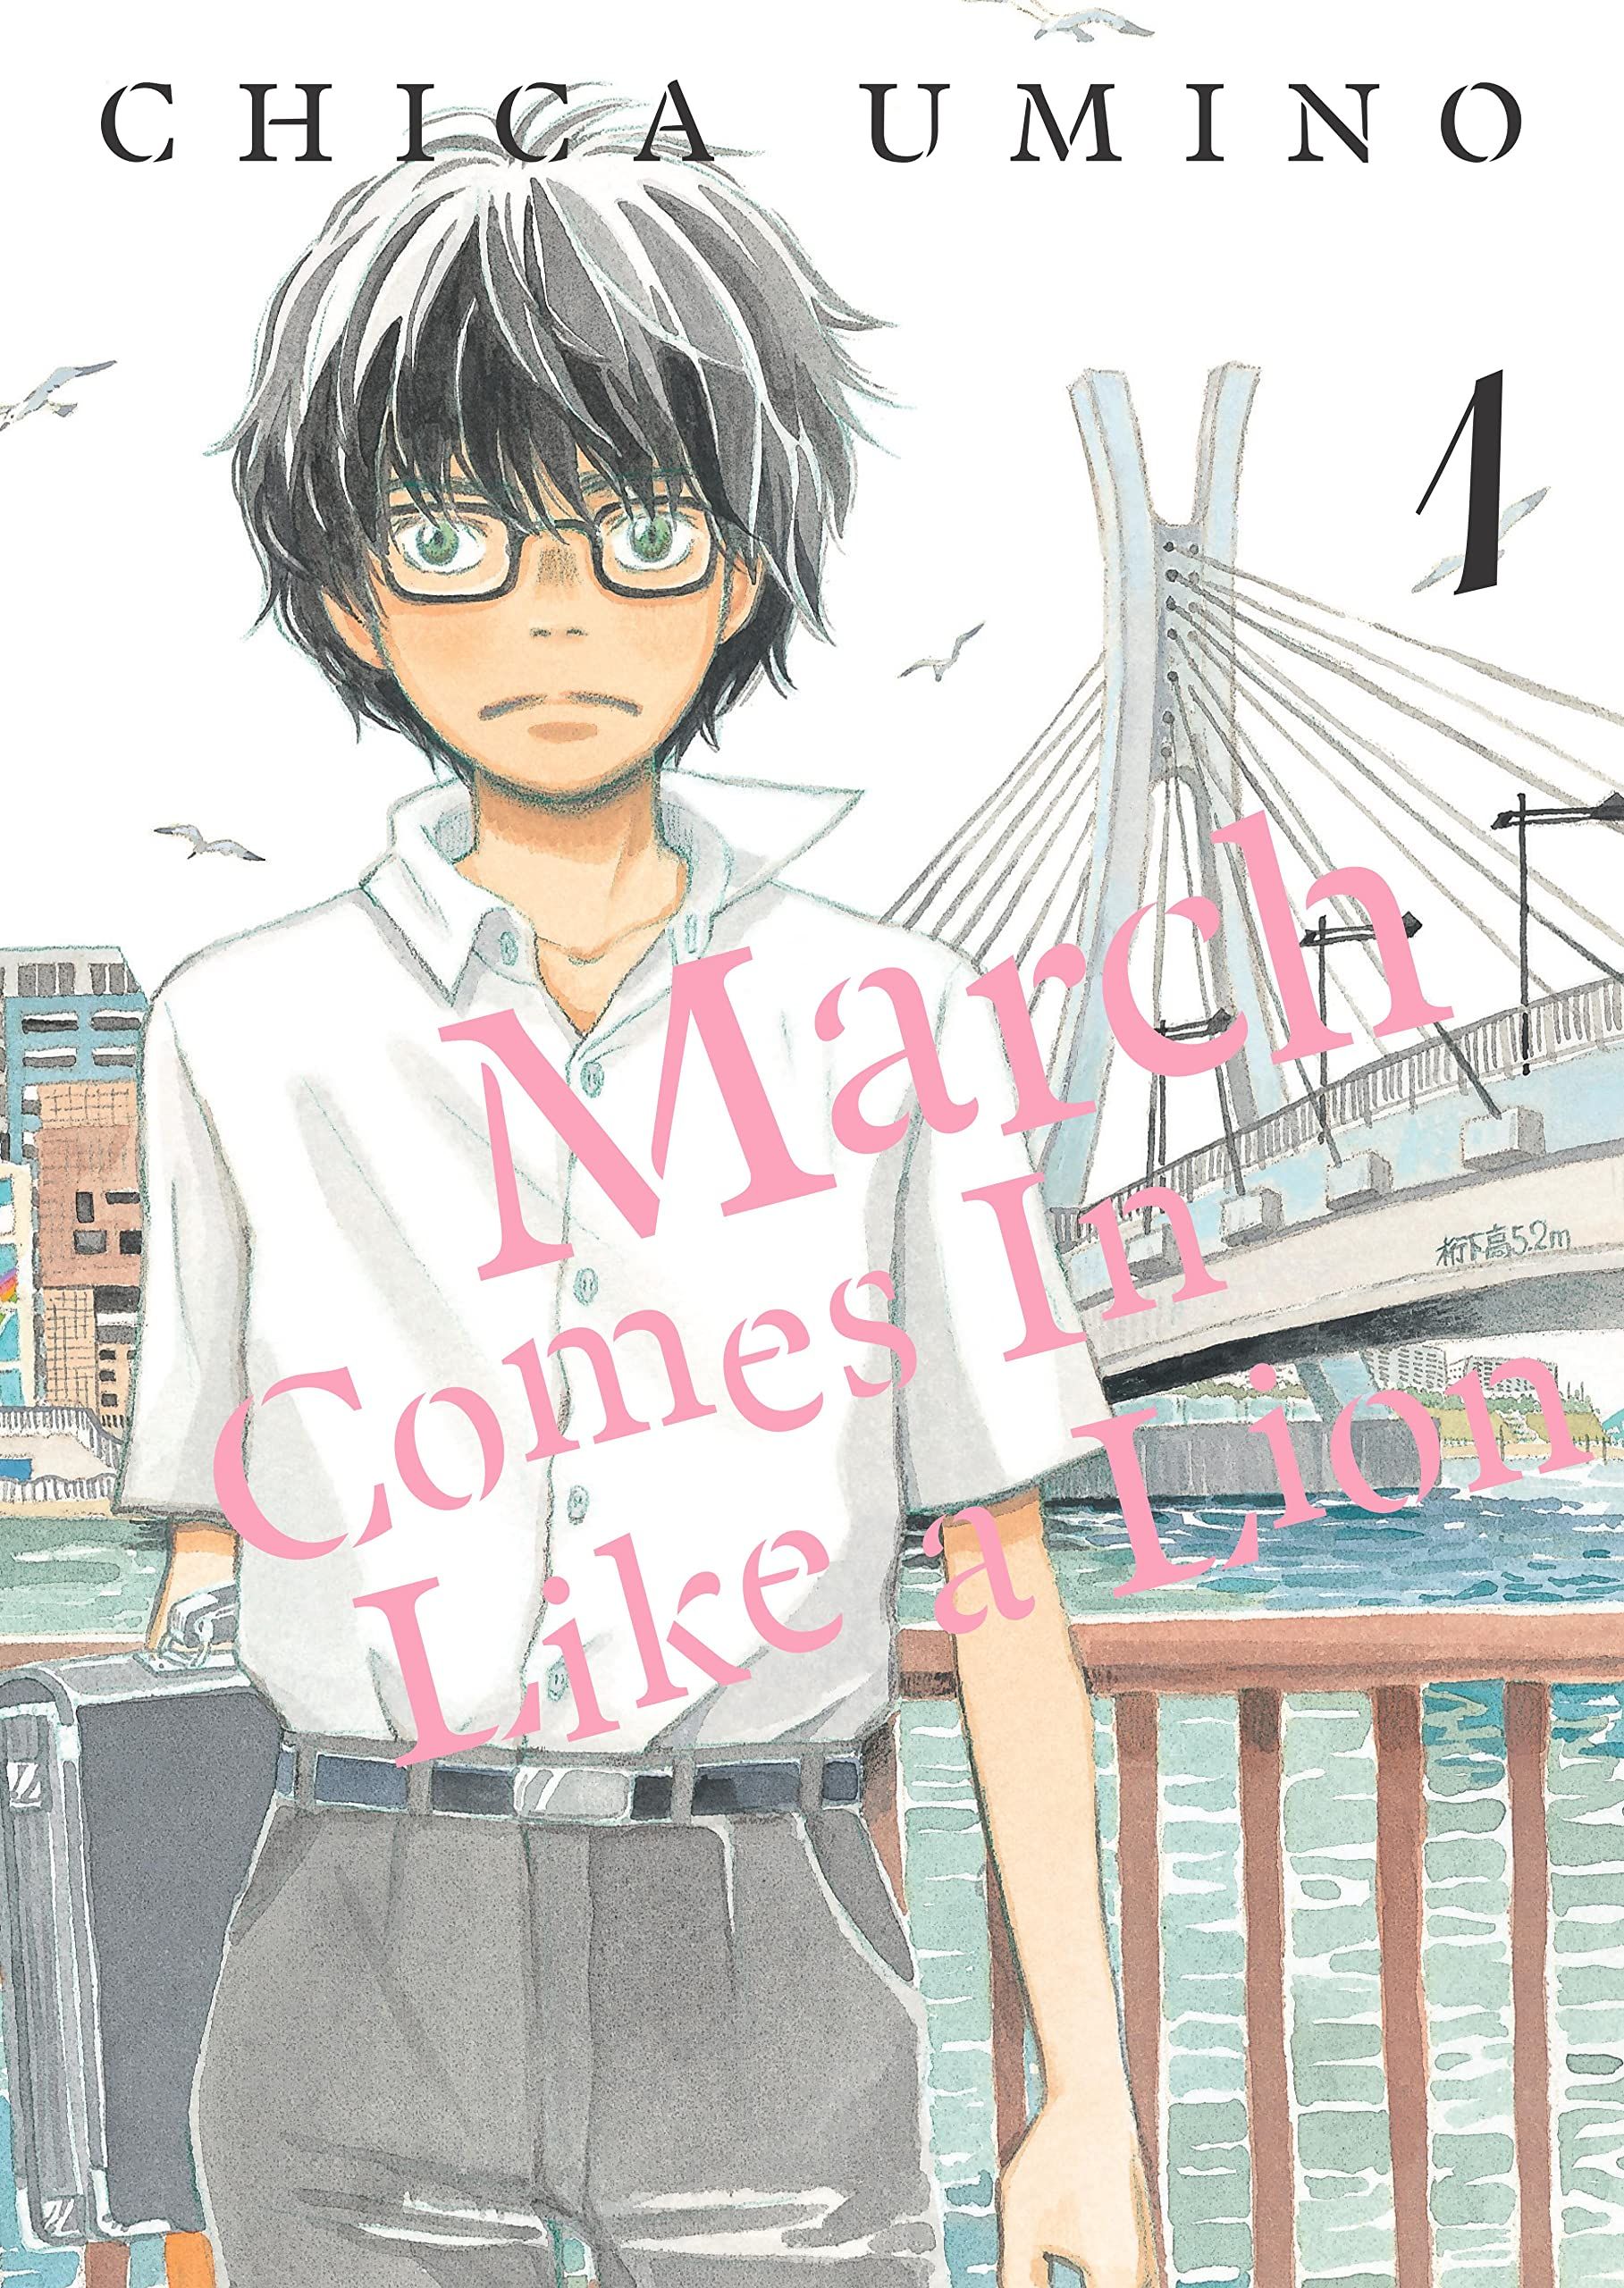 March Comes in Like a Lion by Chica Umino cover